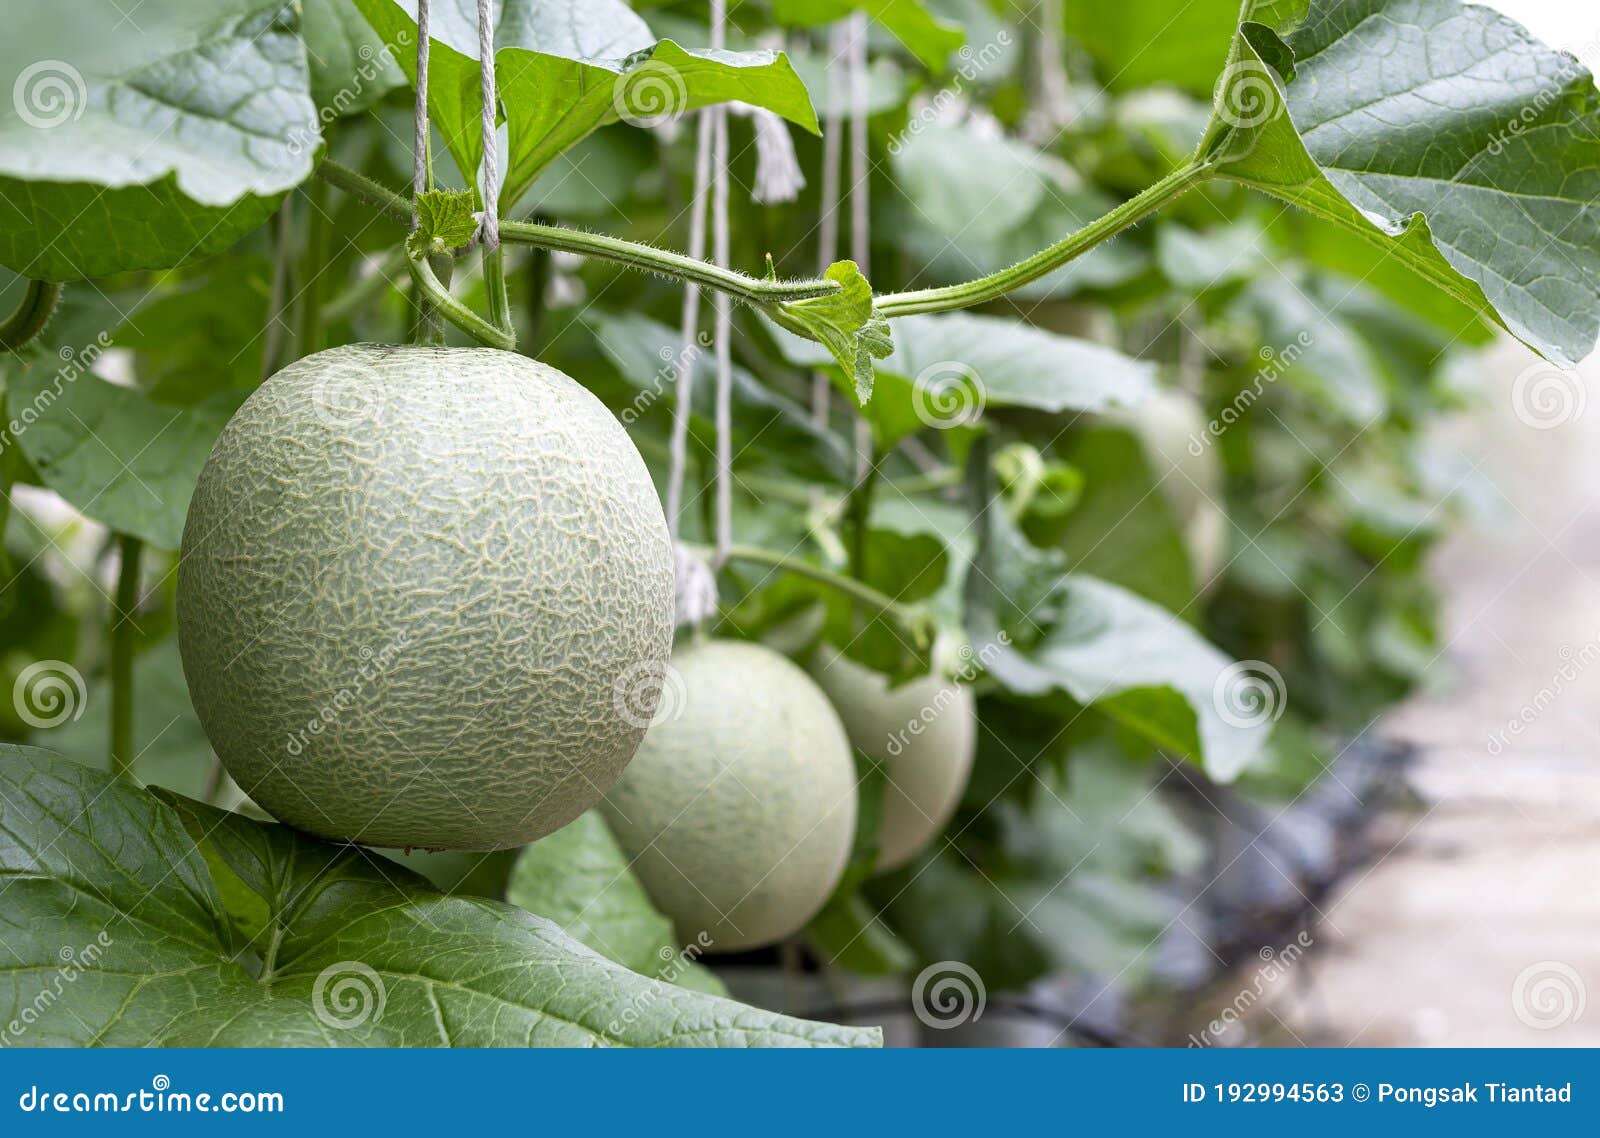 Cantaloupe Melon is Growing in Greenhouse. Melon is a Large Fruit of a Plant of the Gourd Family, with Sweet Flesh Stock Image - Image of health, agriculture: 192994563